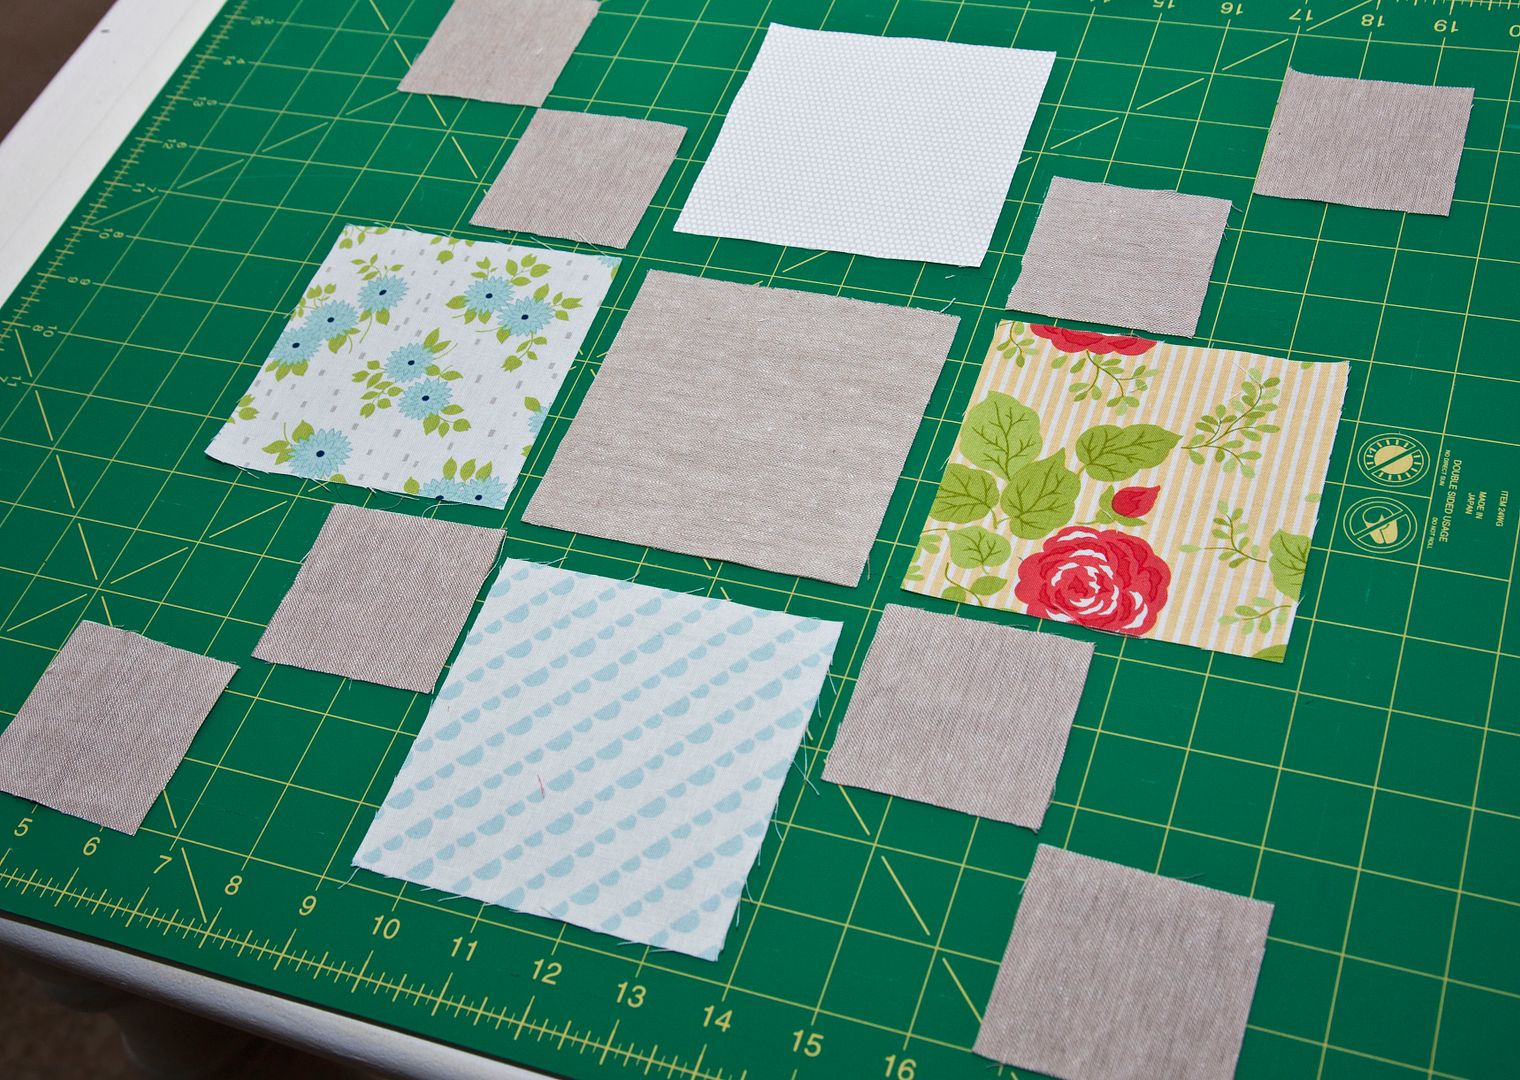 Free scrap quilt tutorial for beginners by Lella Boutique.